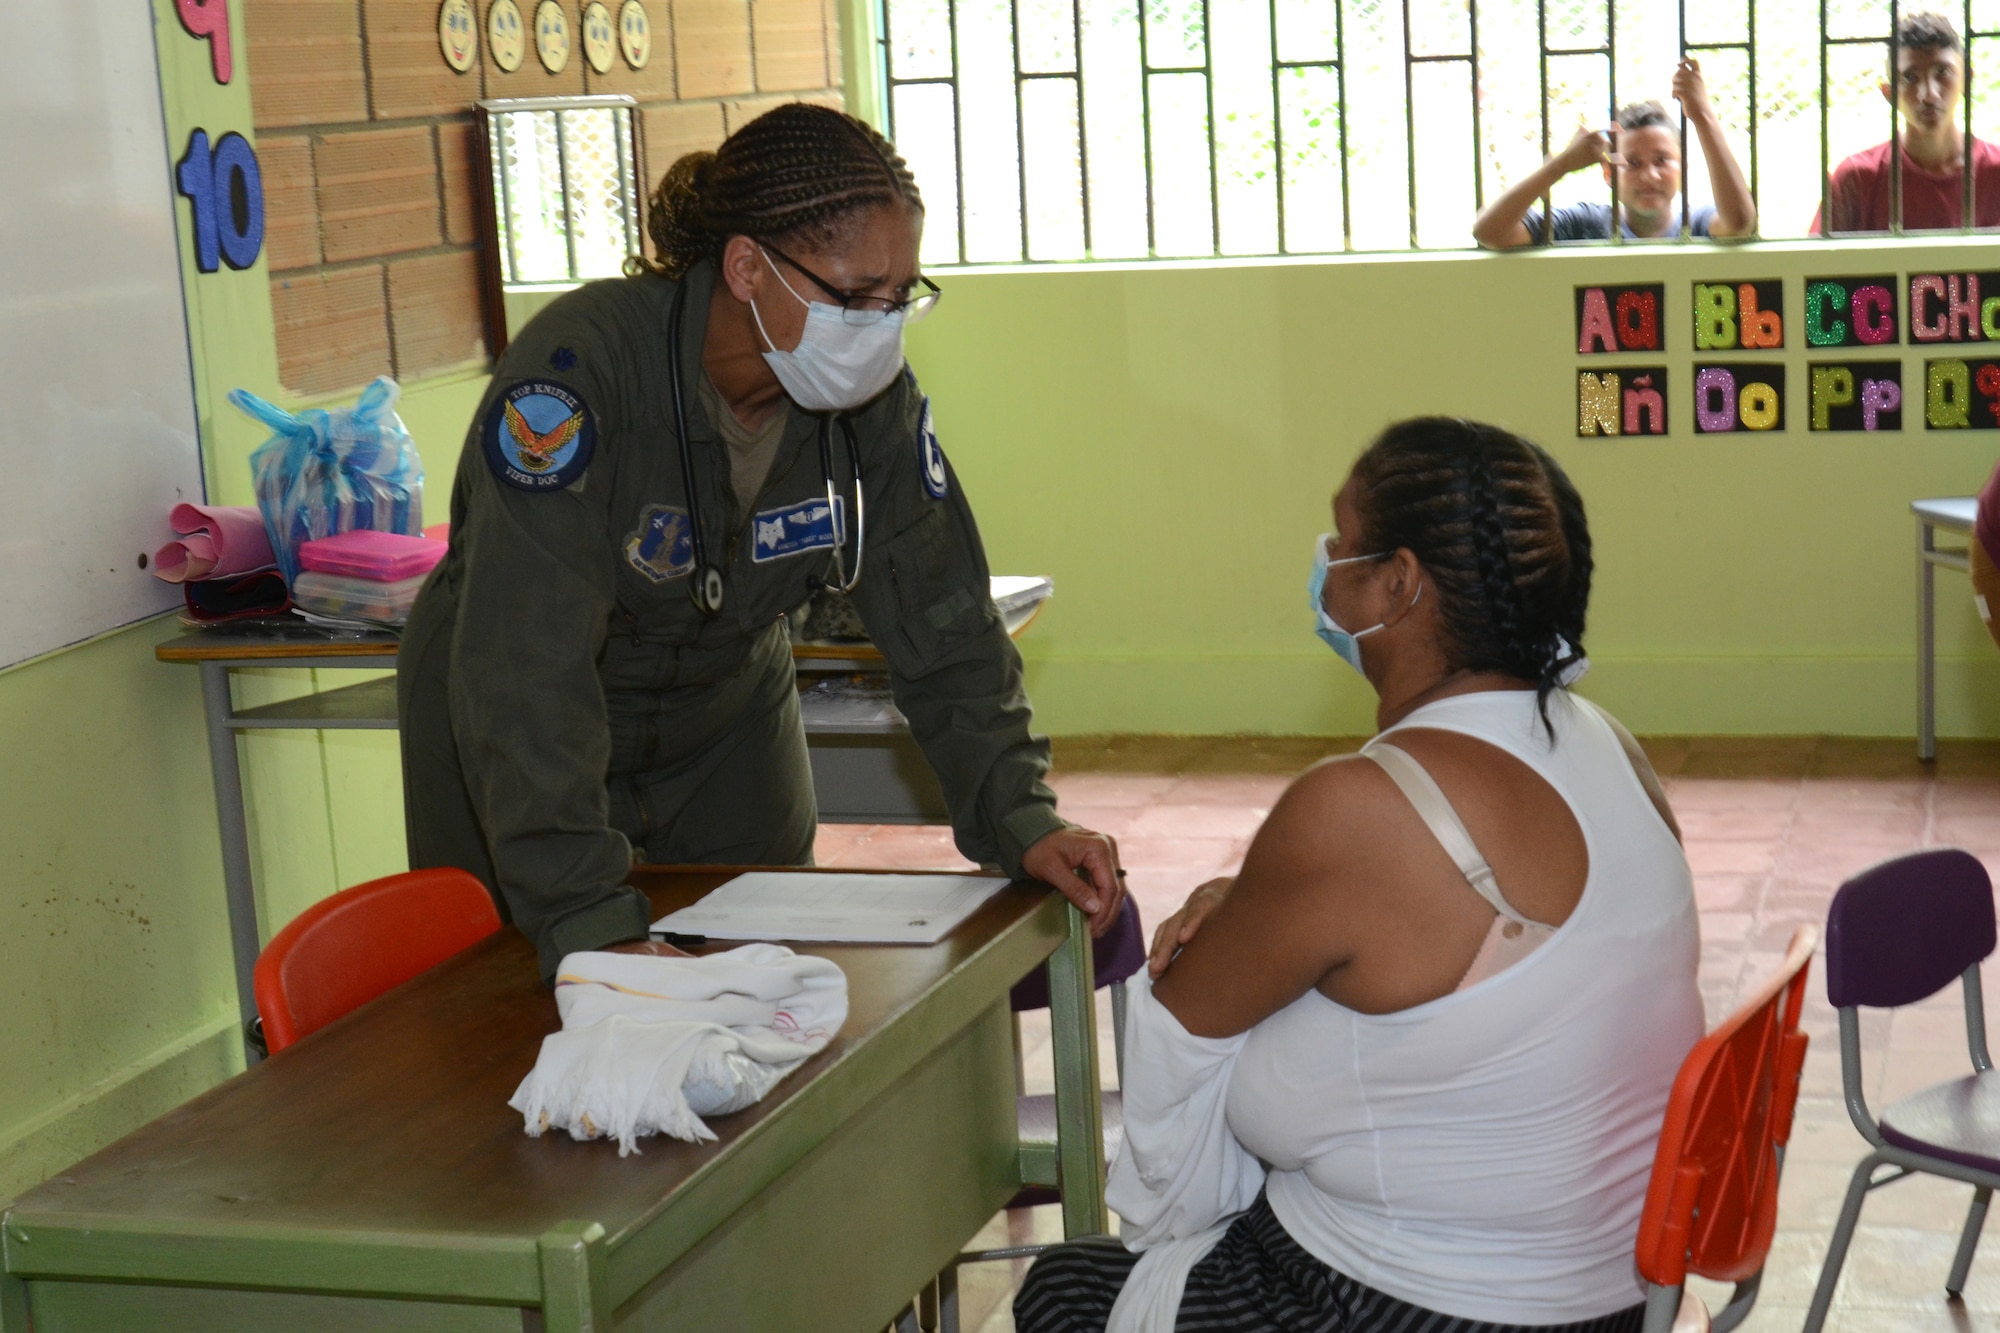 U.S. Air Force Lt. Col. Vanessa Wideman, a flight doctor with the 169th Medical Group, examines a Colombian patent September 4, 2021. Doctors and med techs from the South Carolina Air National Guard’s 169th Medical Group teamed up with medics from the South Carolina Army National Guard to travel to the remote town of Tamana, Colombia to participate in a real-word community medical and humanitarian support mission September 4, 2021. While there, the medical personnel provided dental, optical, dermatology, pharmacy and general medical care to more than 300 patients. South Carolina Air National Guard and South Carolina Army National Guard medical personnel participate in the regional Ángel de los Andes (Angel of the Andes) and Cooperación VII exercises in Colombia August 30 to September 10, 2021. The exercises provide training opportunities with South Carolina’s state partner Colombia in realistic combat search and rescue missions as well as humanitarian aid and disaster response scenarios such as earthquakes and tsunamis. (U.S. Air National Guard photo by Lt. Col. Jim St.Clair, 169th Fighter Wing Public Affairs)